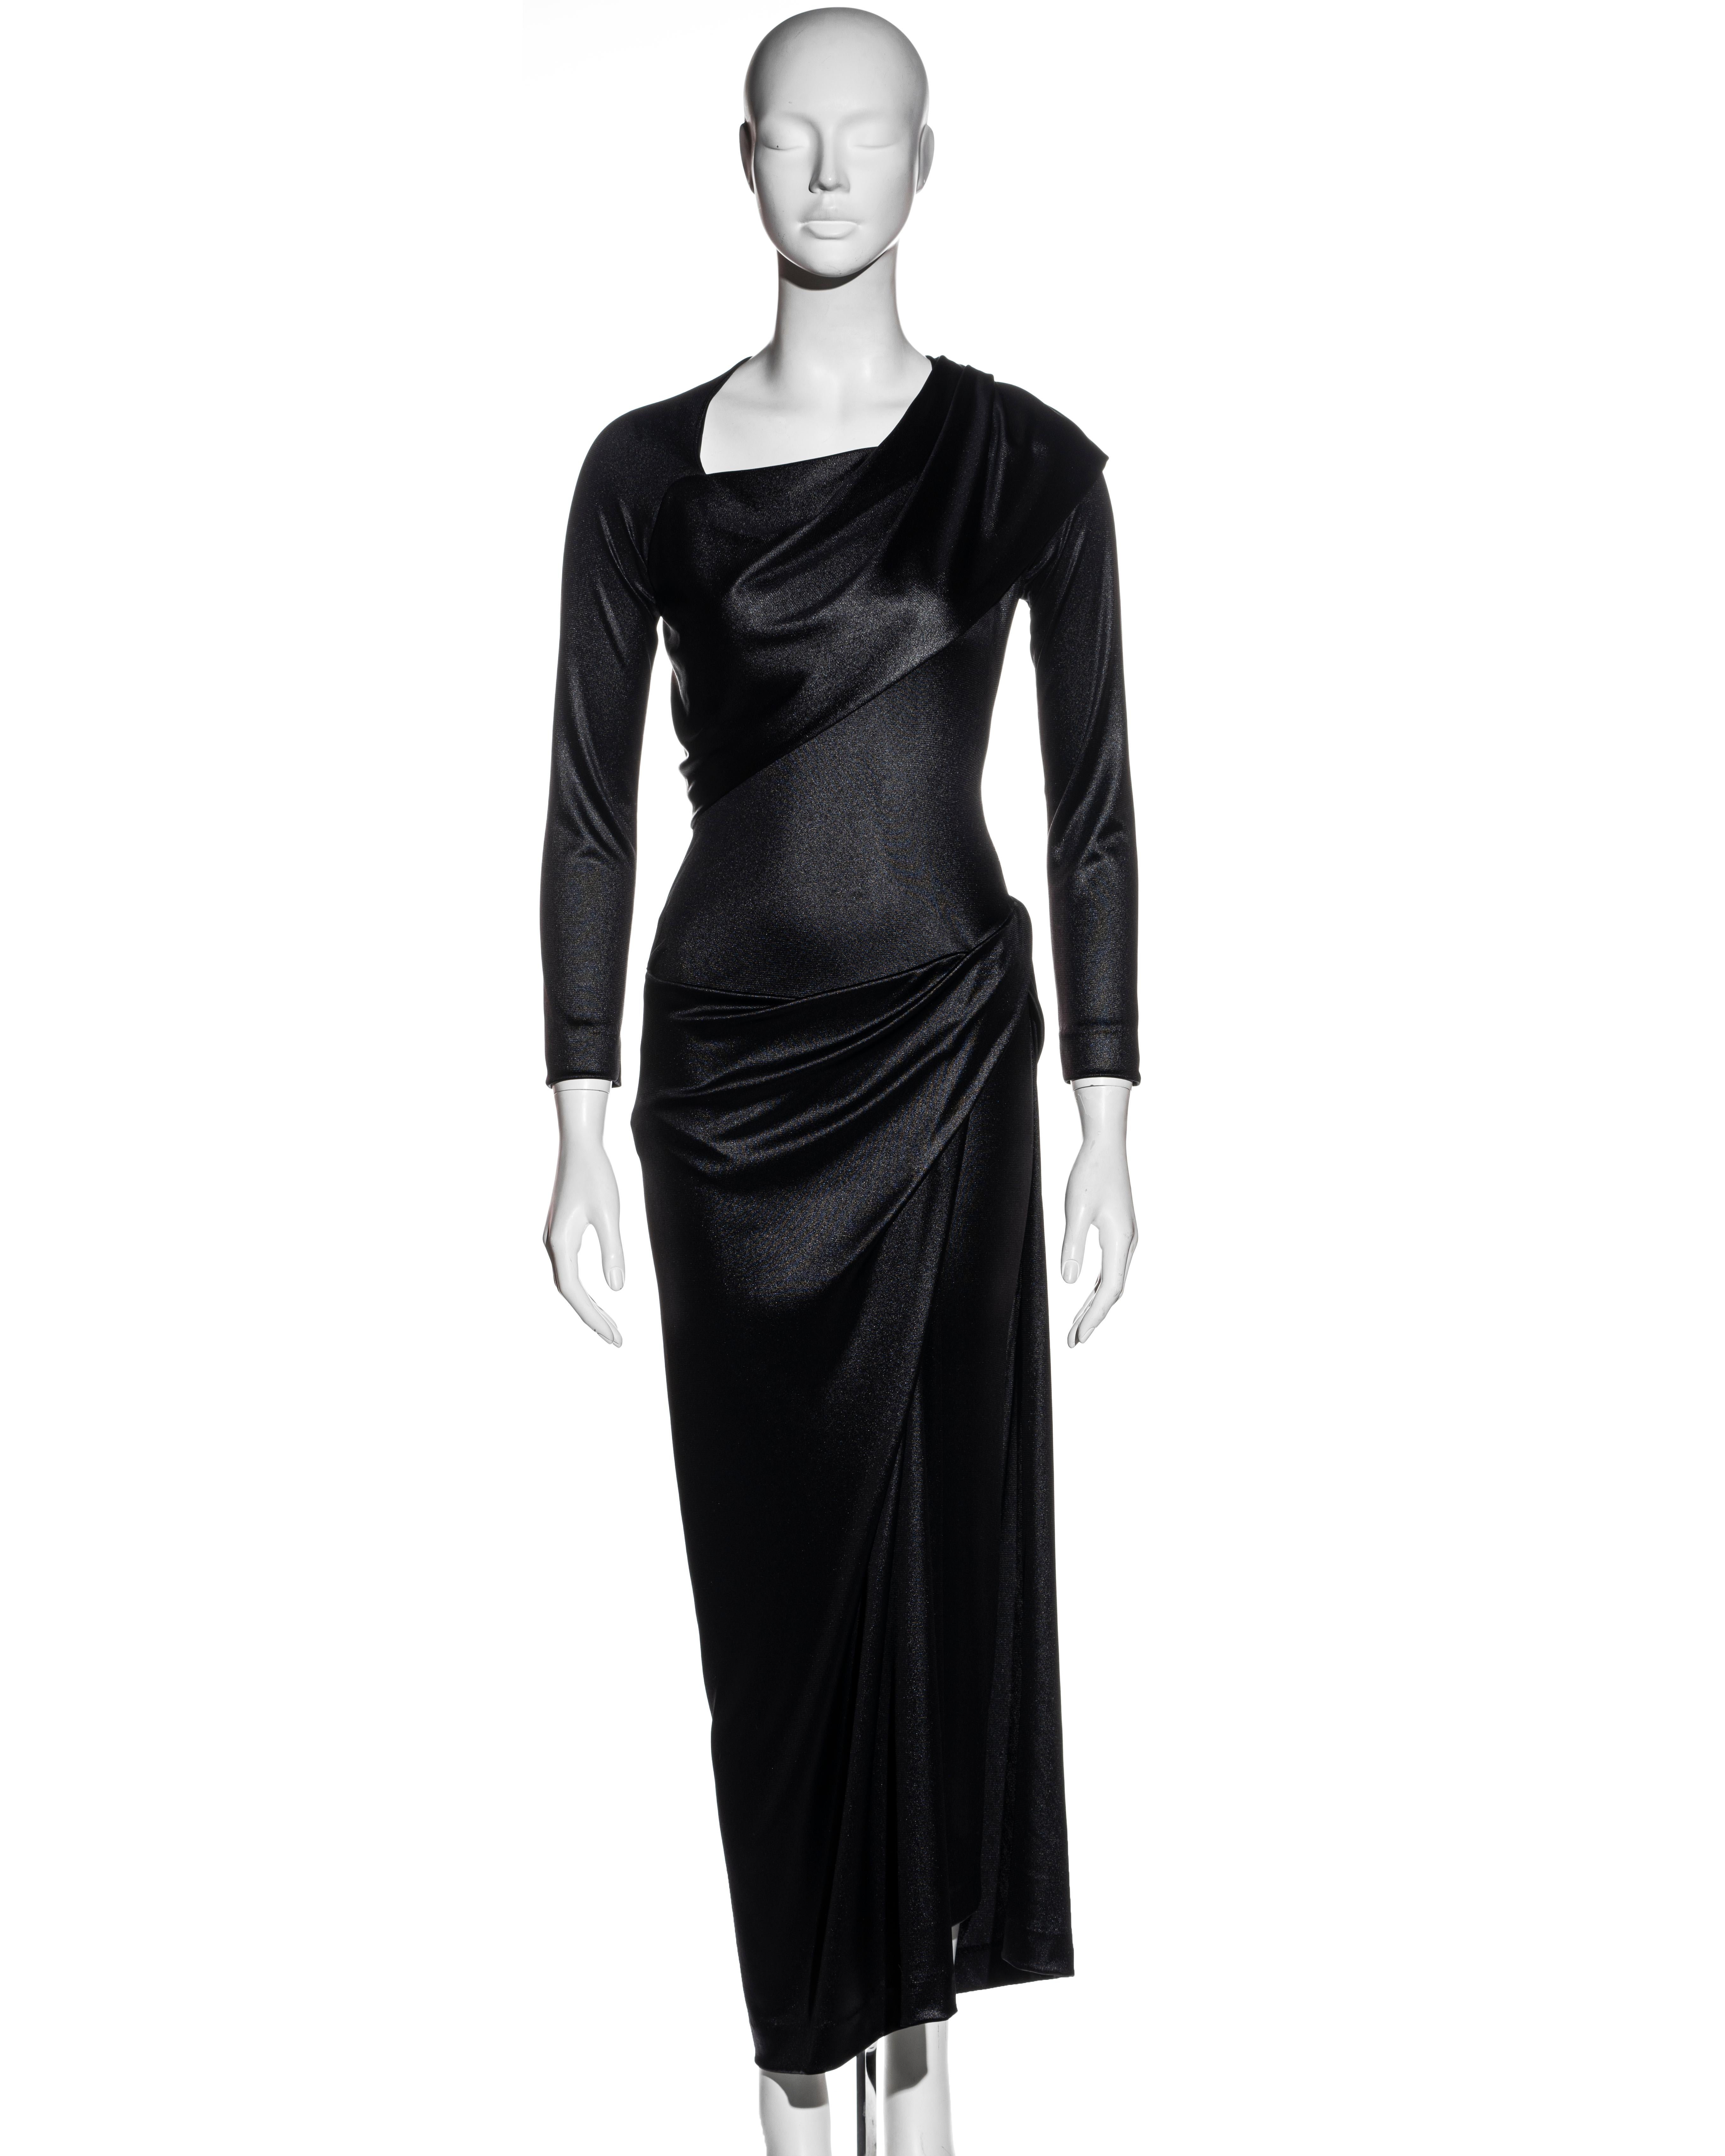 ▪ Vivienne Westwood metallic black nylon jersey evening dress
▪ Draped skirt with high leg slit 
▪ Fitted bodice 
▪ Draped panels at the bust and shoulders 
▪ Asymmetric neckline 
▪ UK 12 - Medium
▪ Fall-Winter 1997